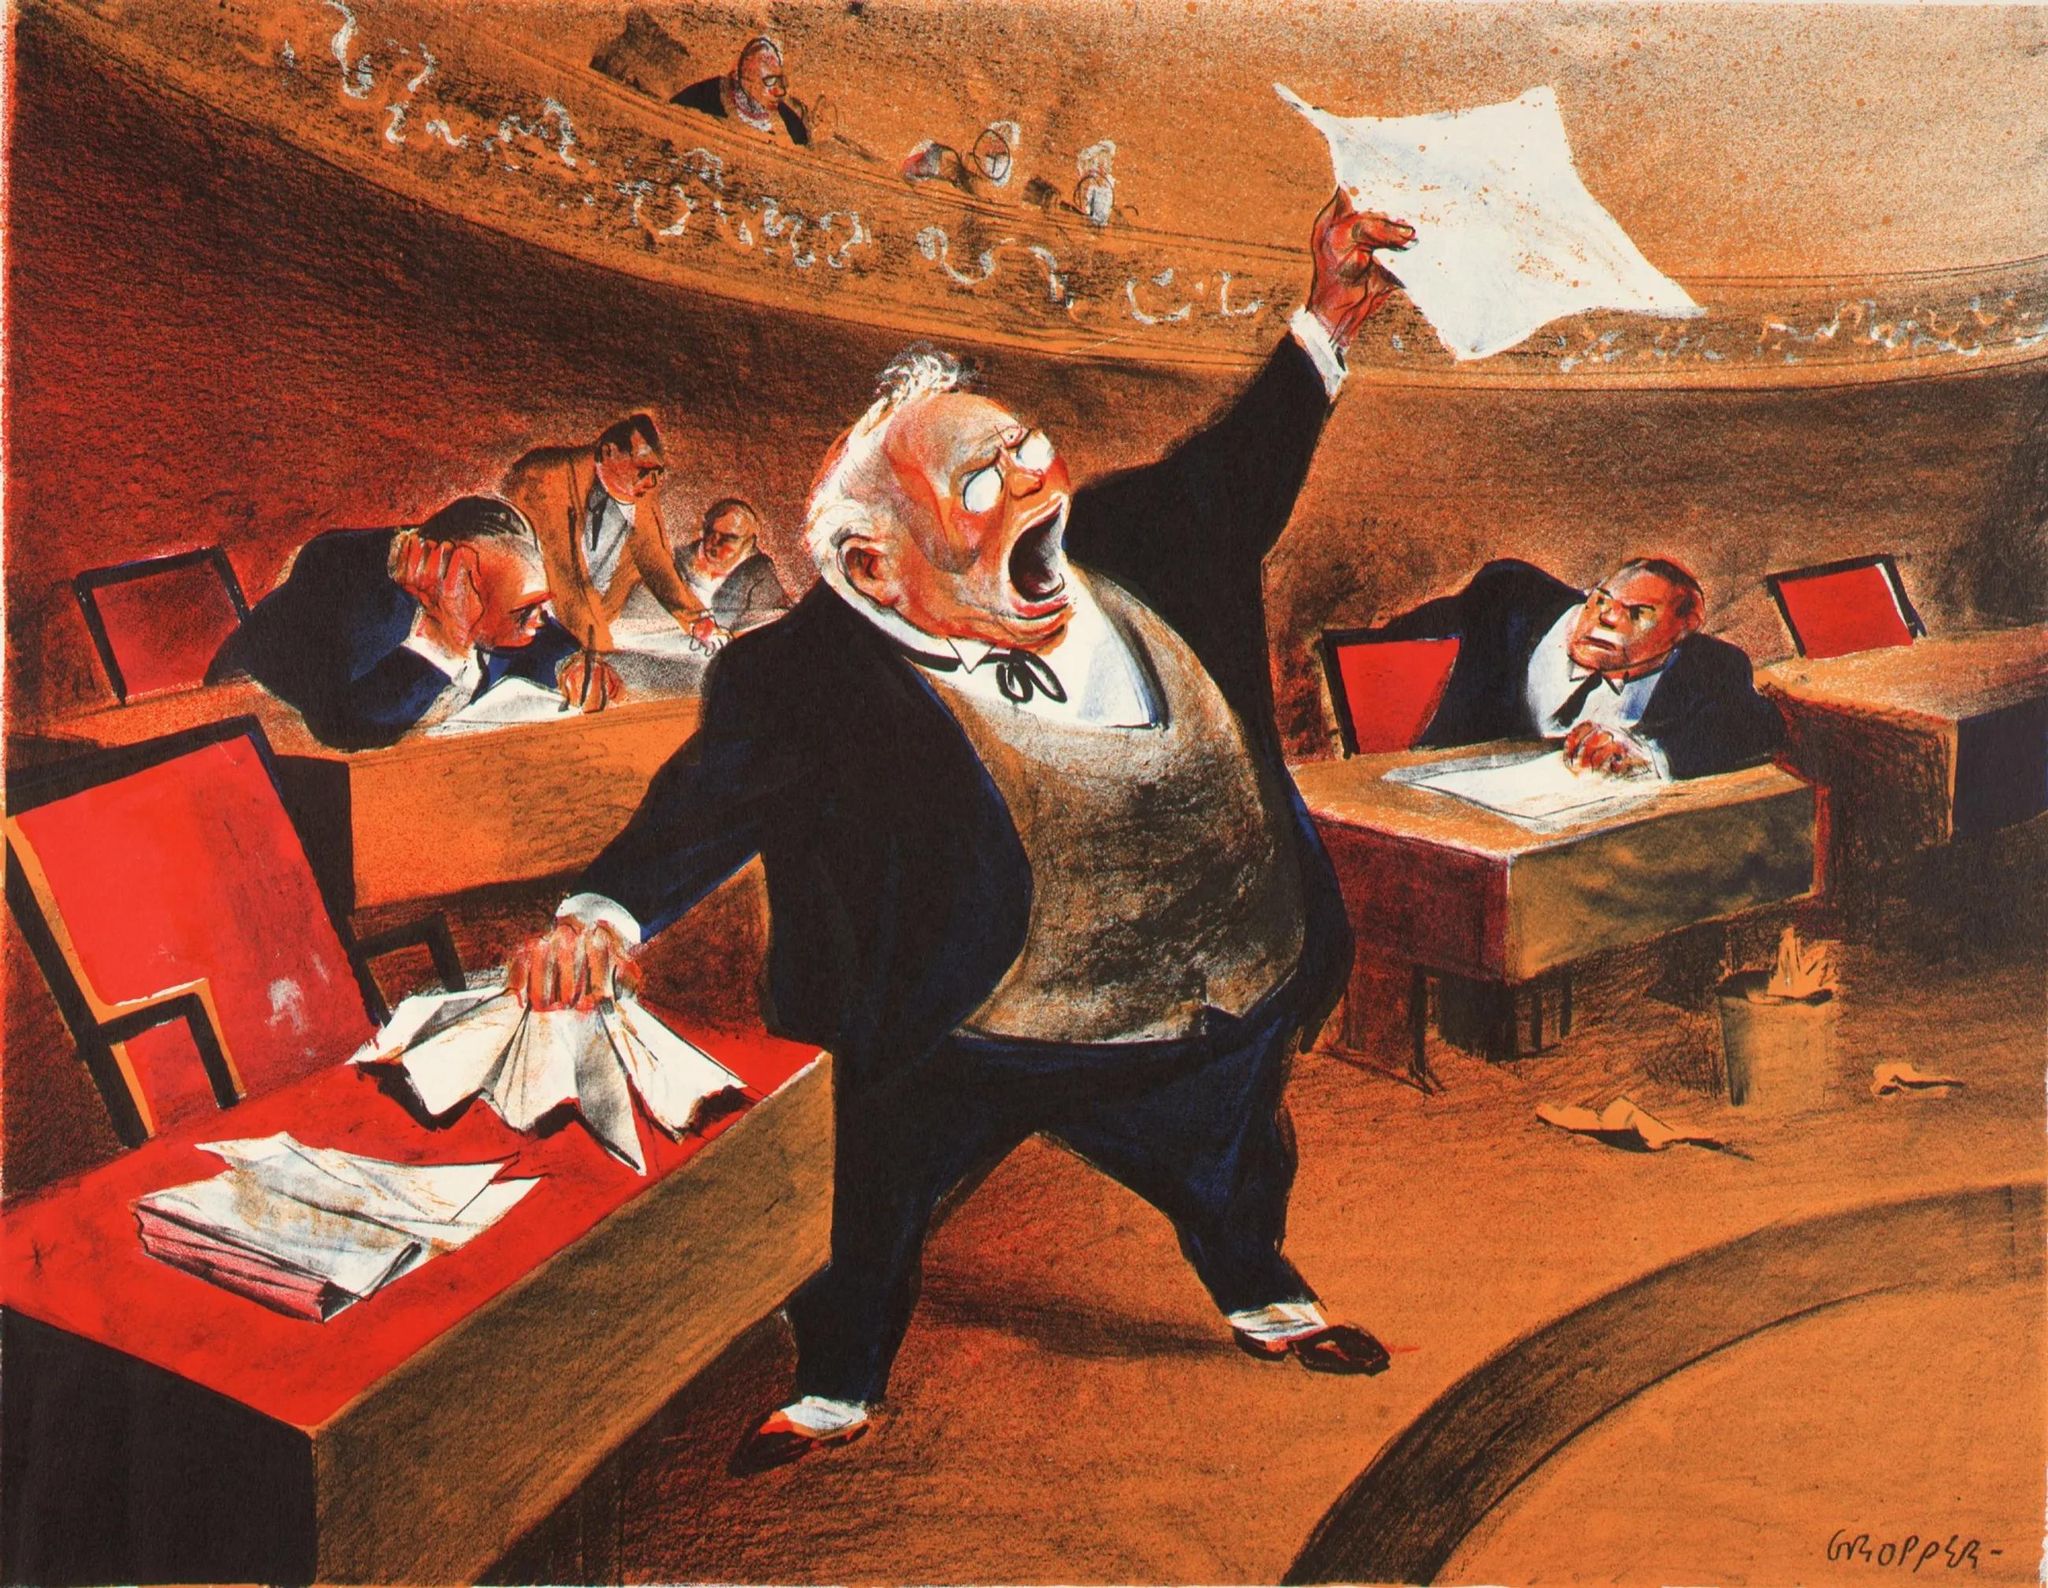 Untitled (Man crumpling paper in courtroom)